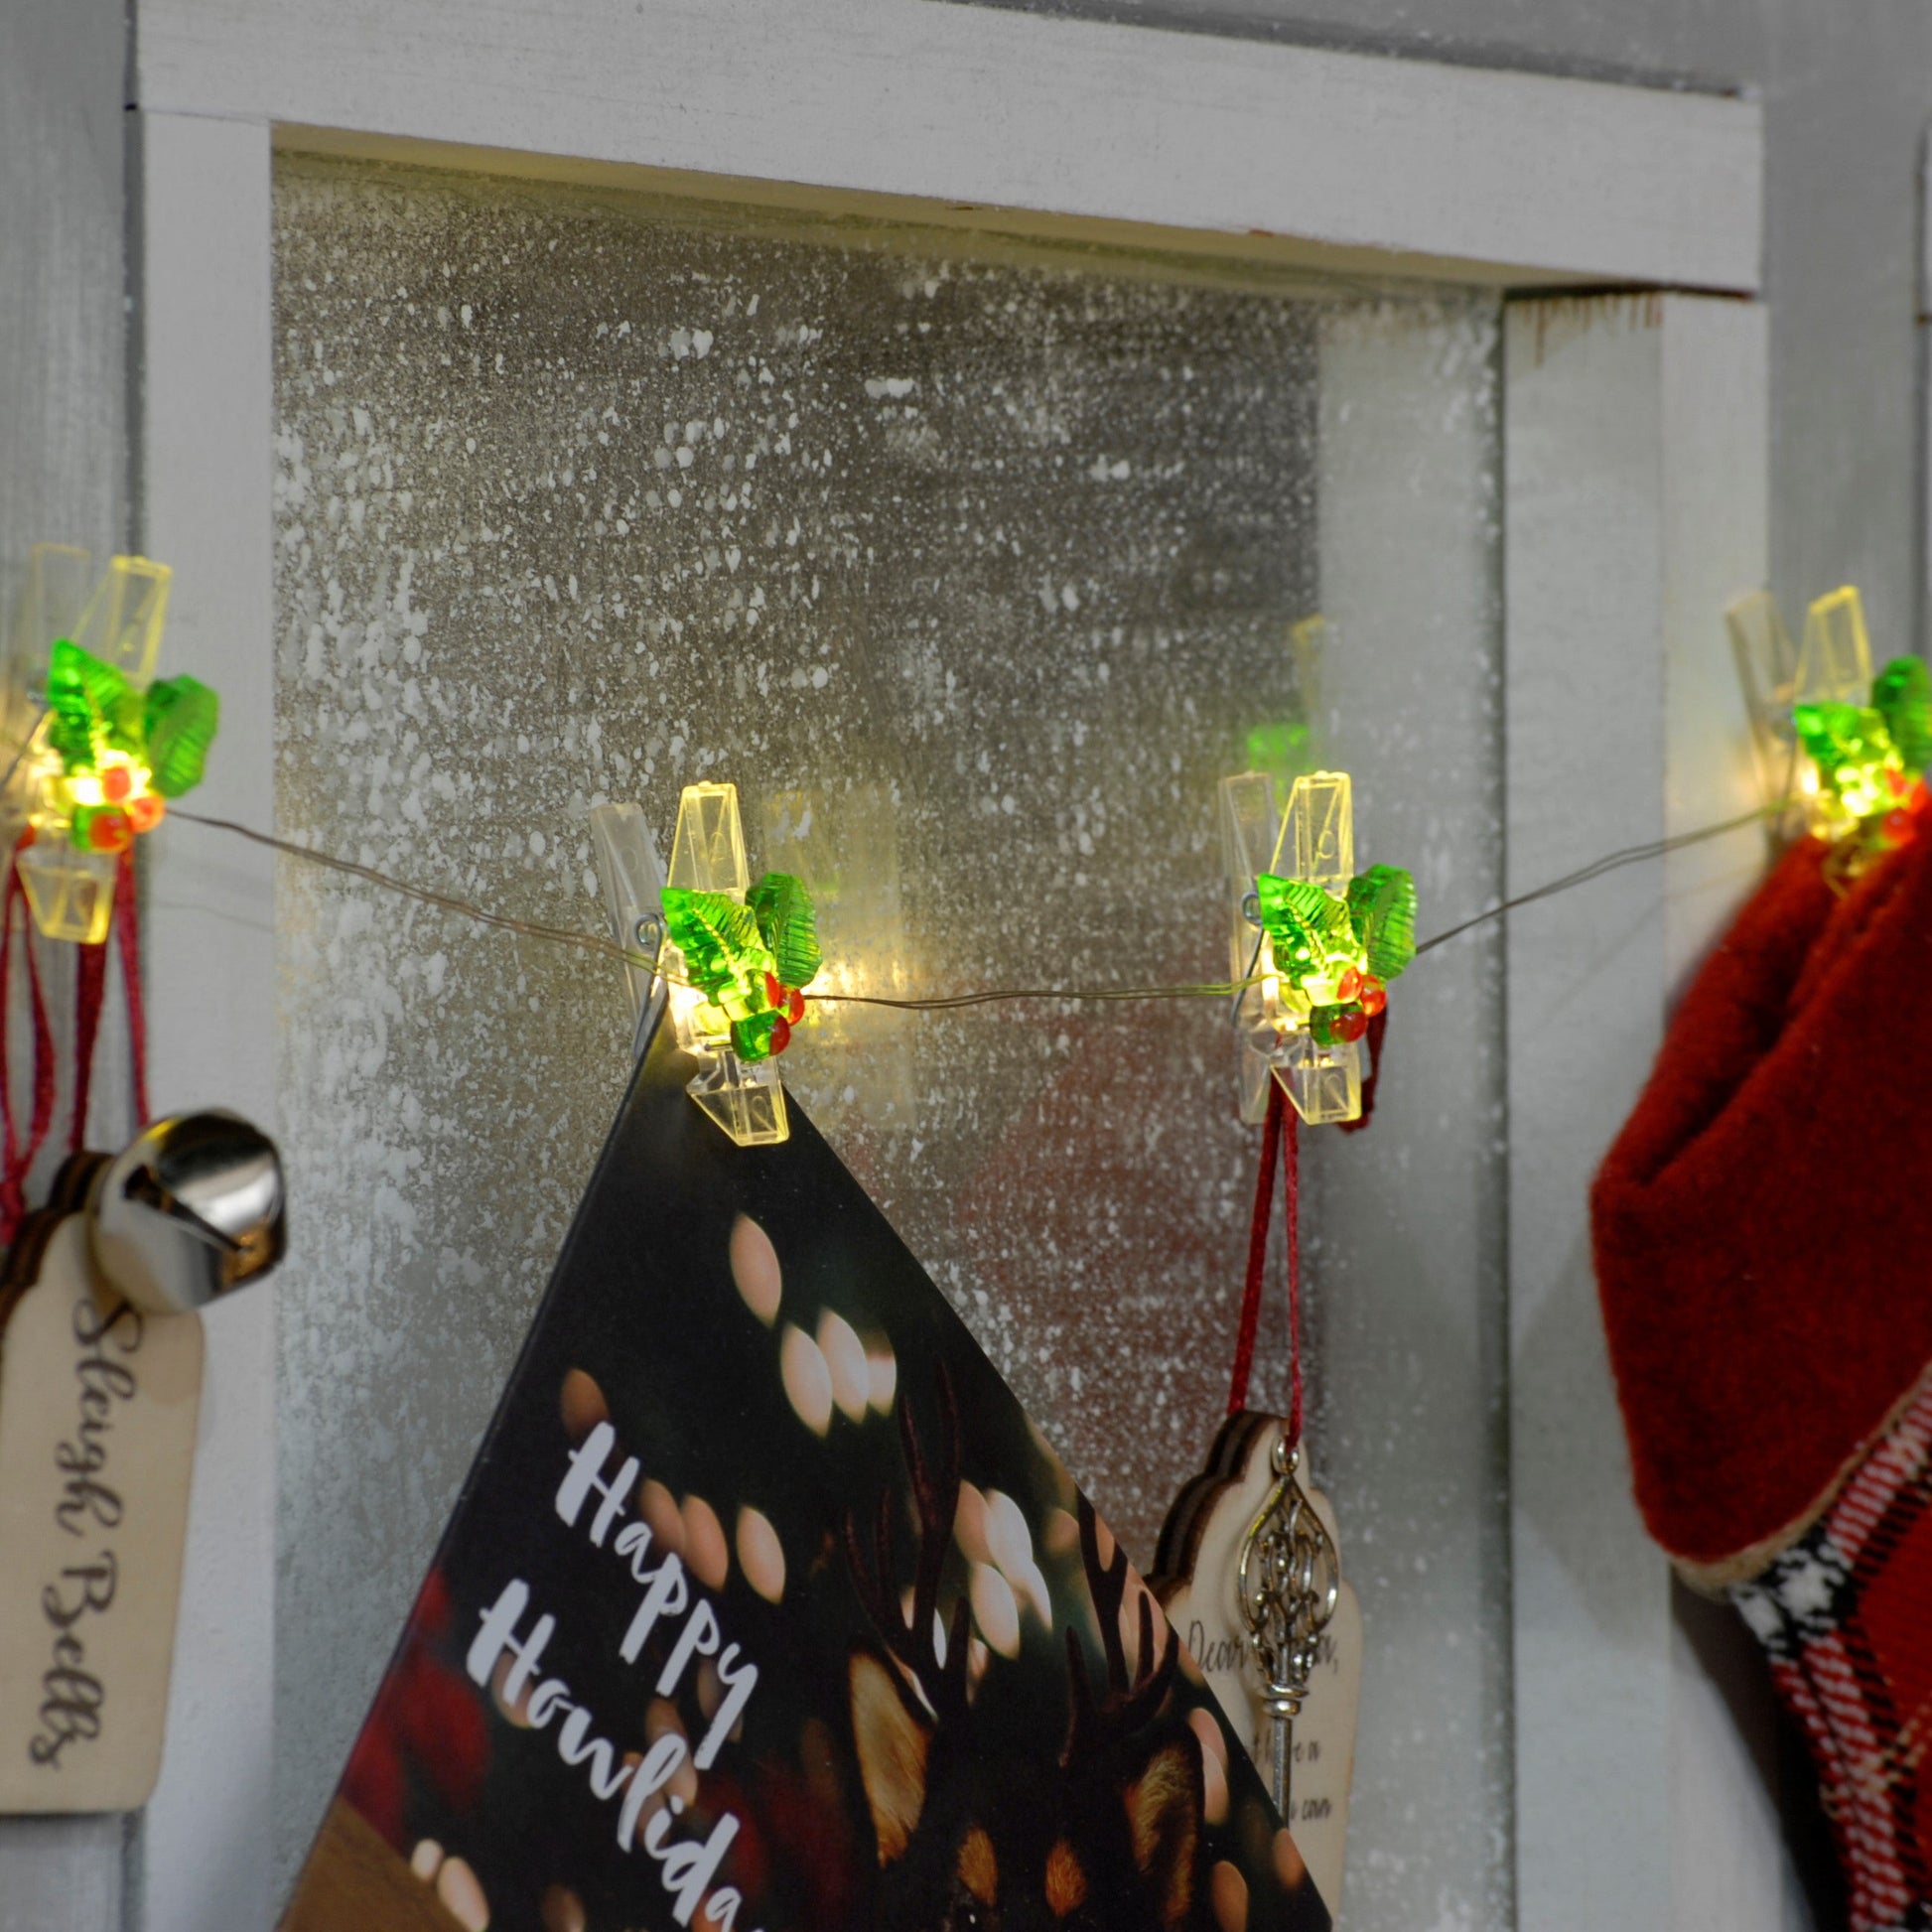 Holly design peg led lights shown hanging on a wall with stocking and cards and other Christmas objects hanging from the pegs